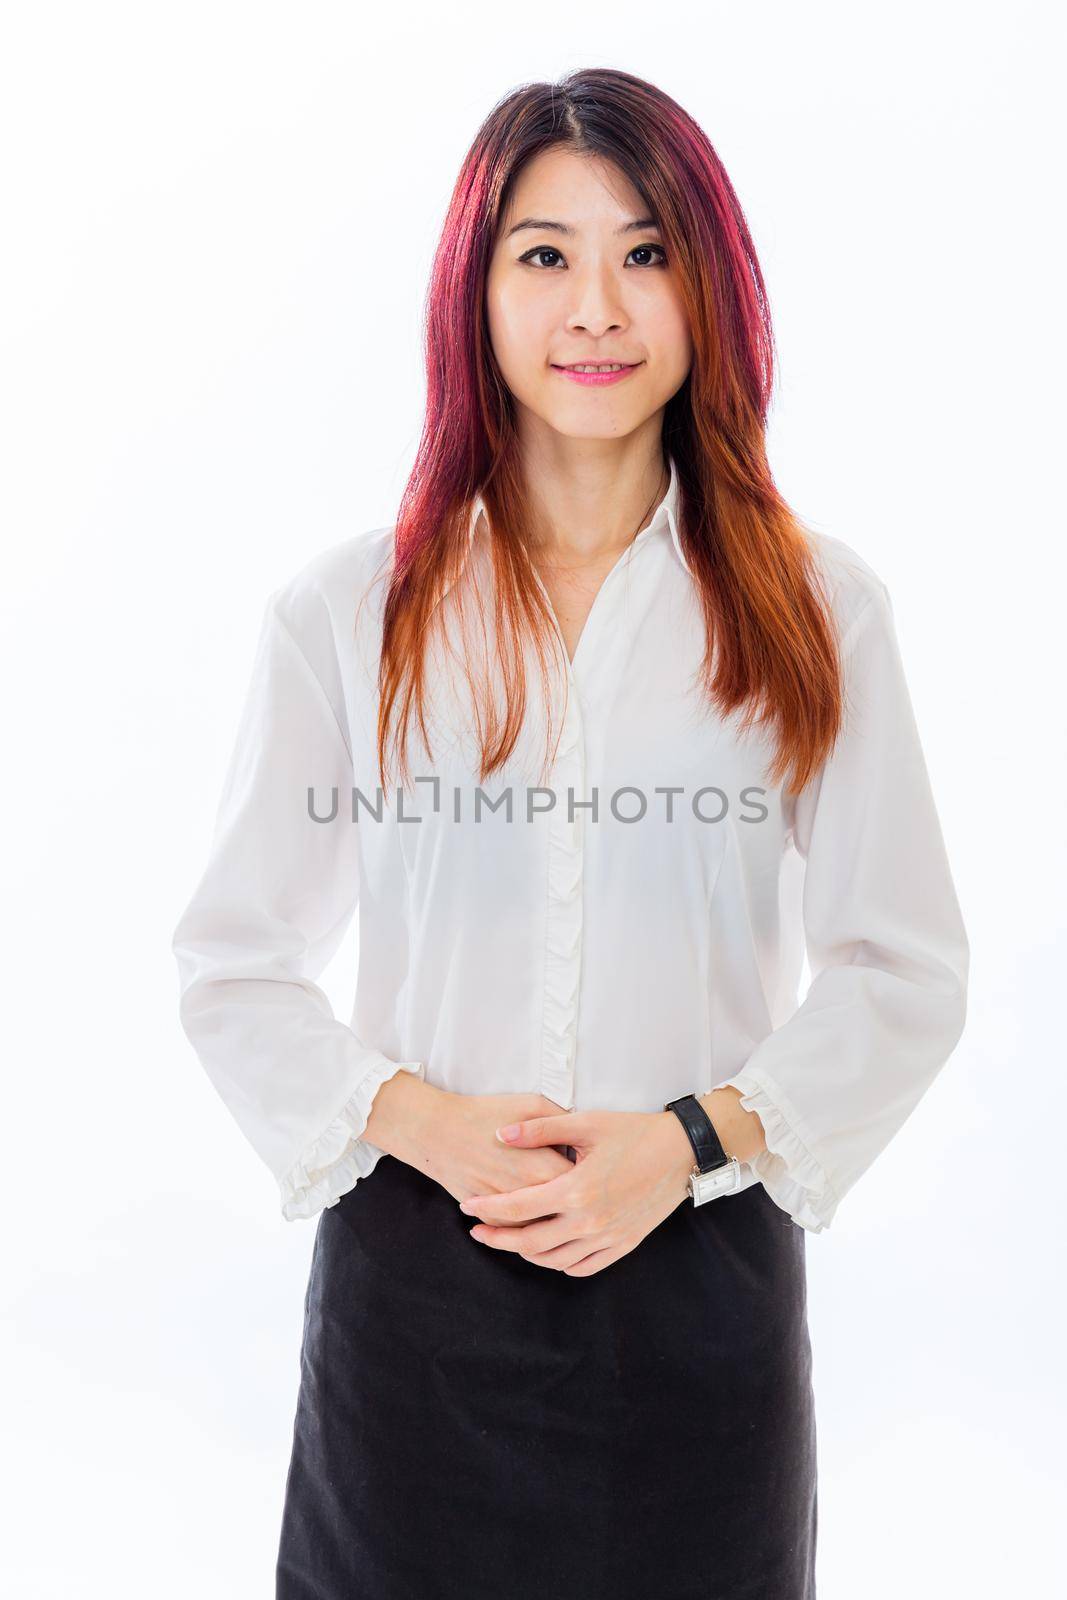 Asian woman in casual business attire by imagesbykenny